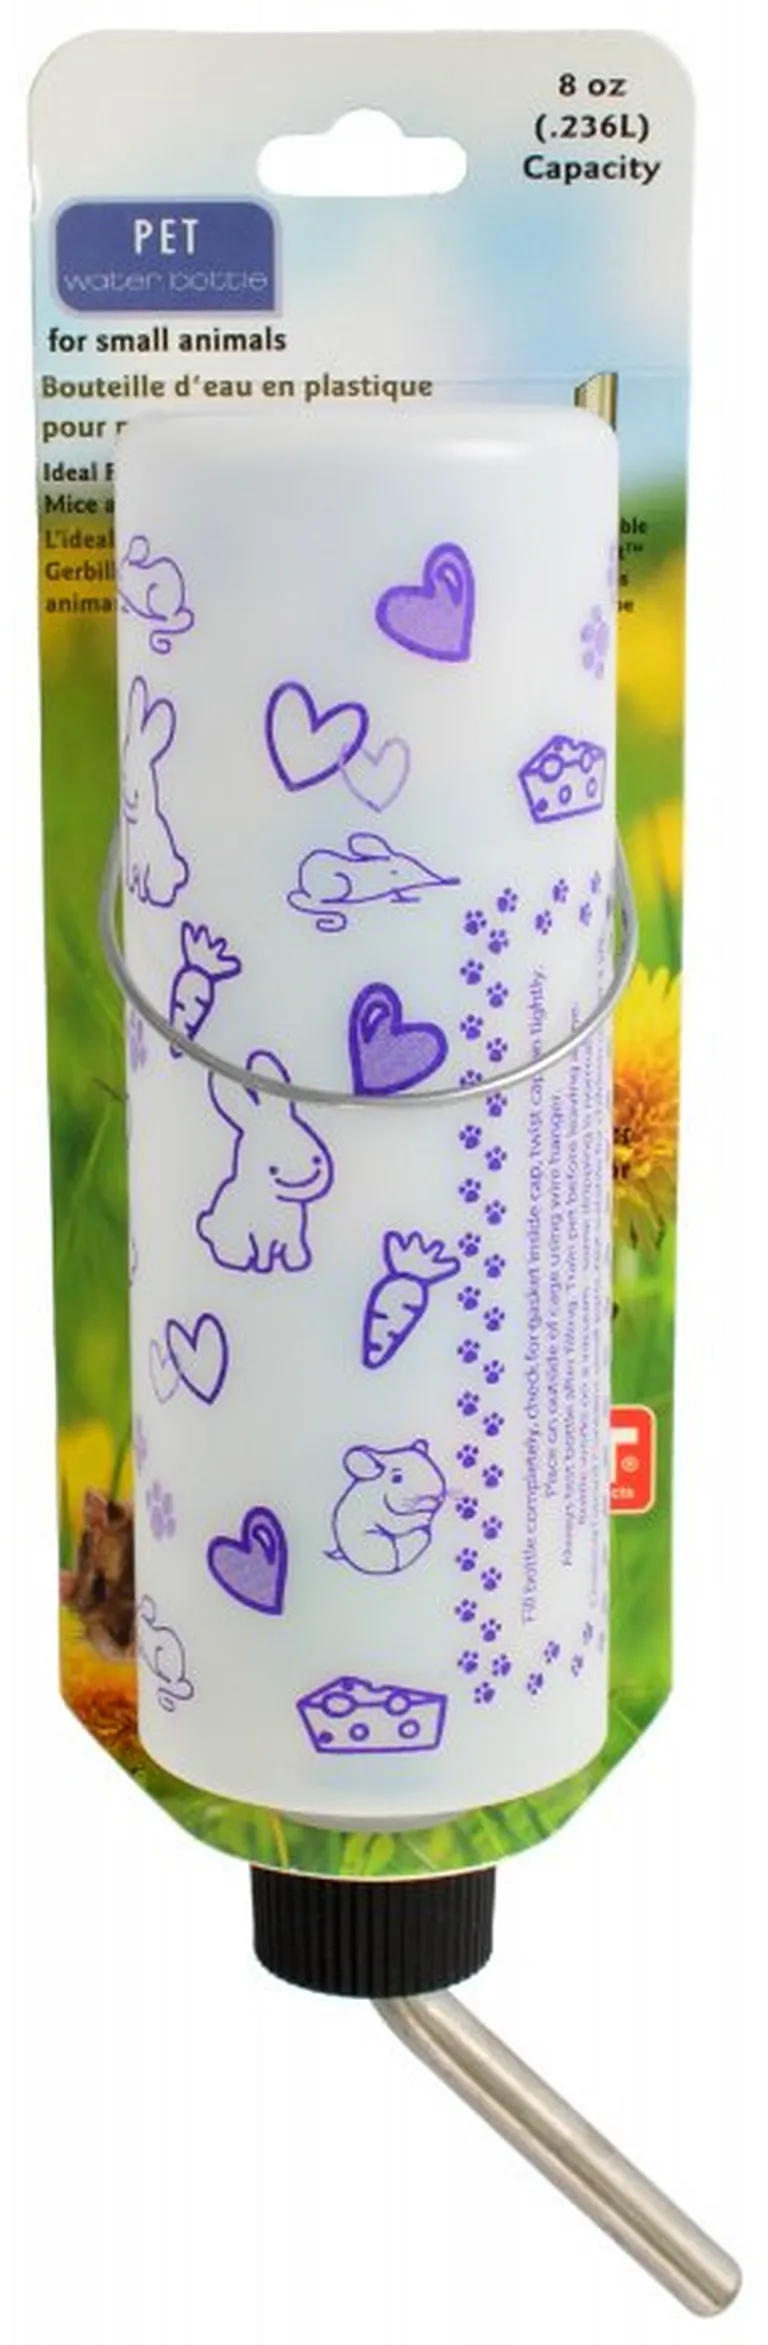 Lixit Pet Water Bottle for Small Animals Opaque Photo 2